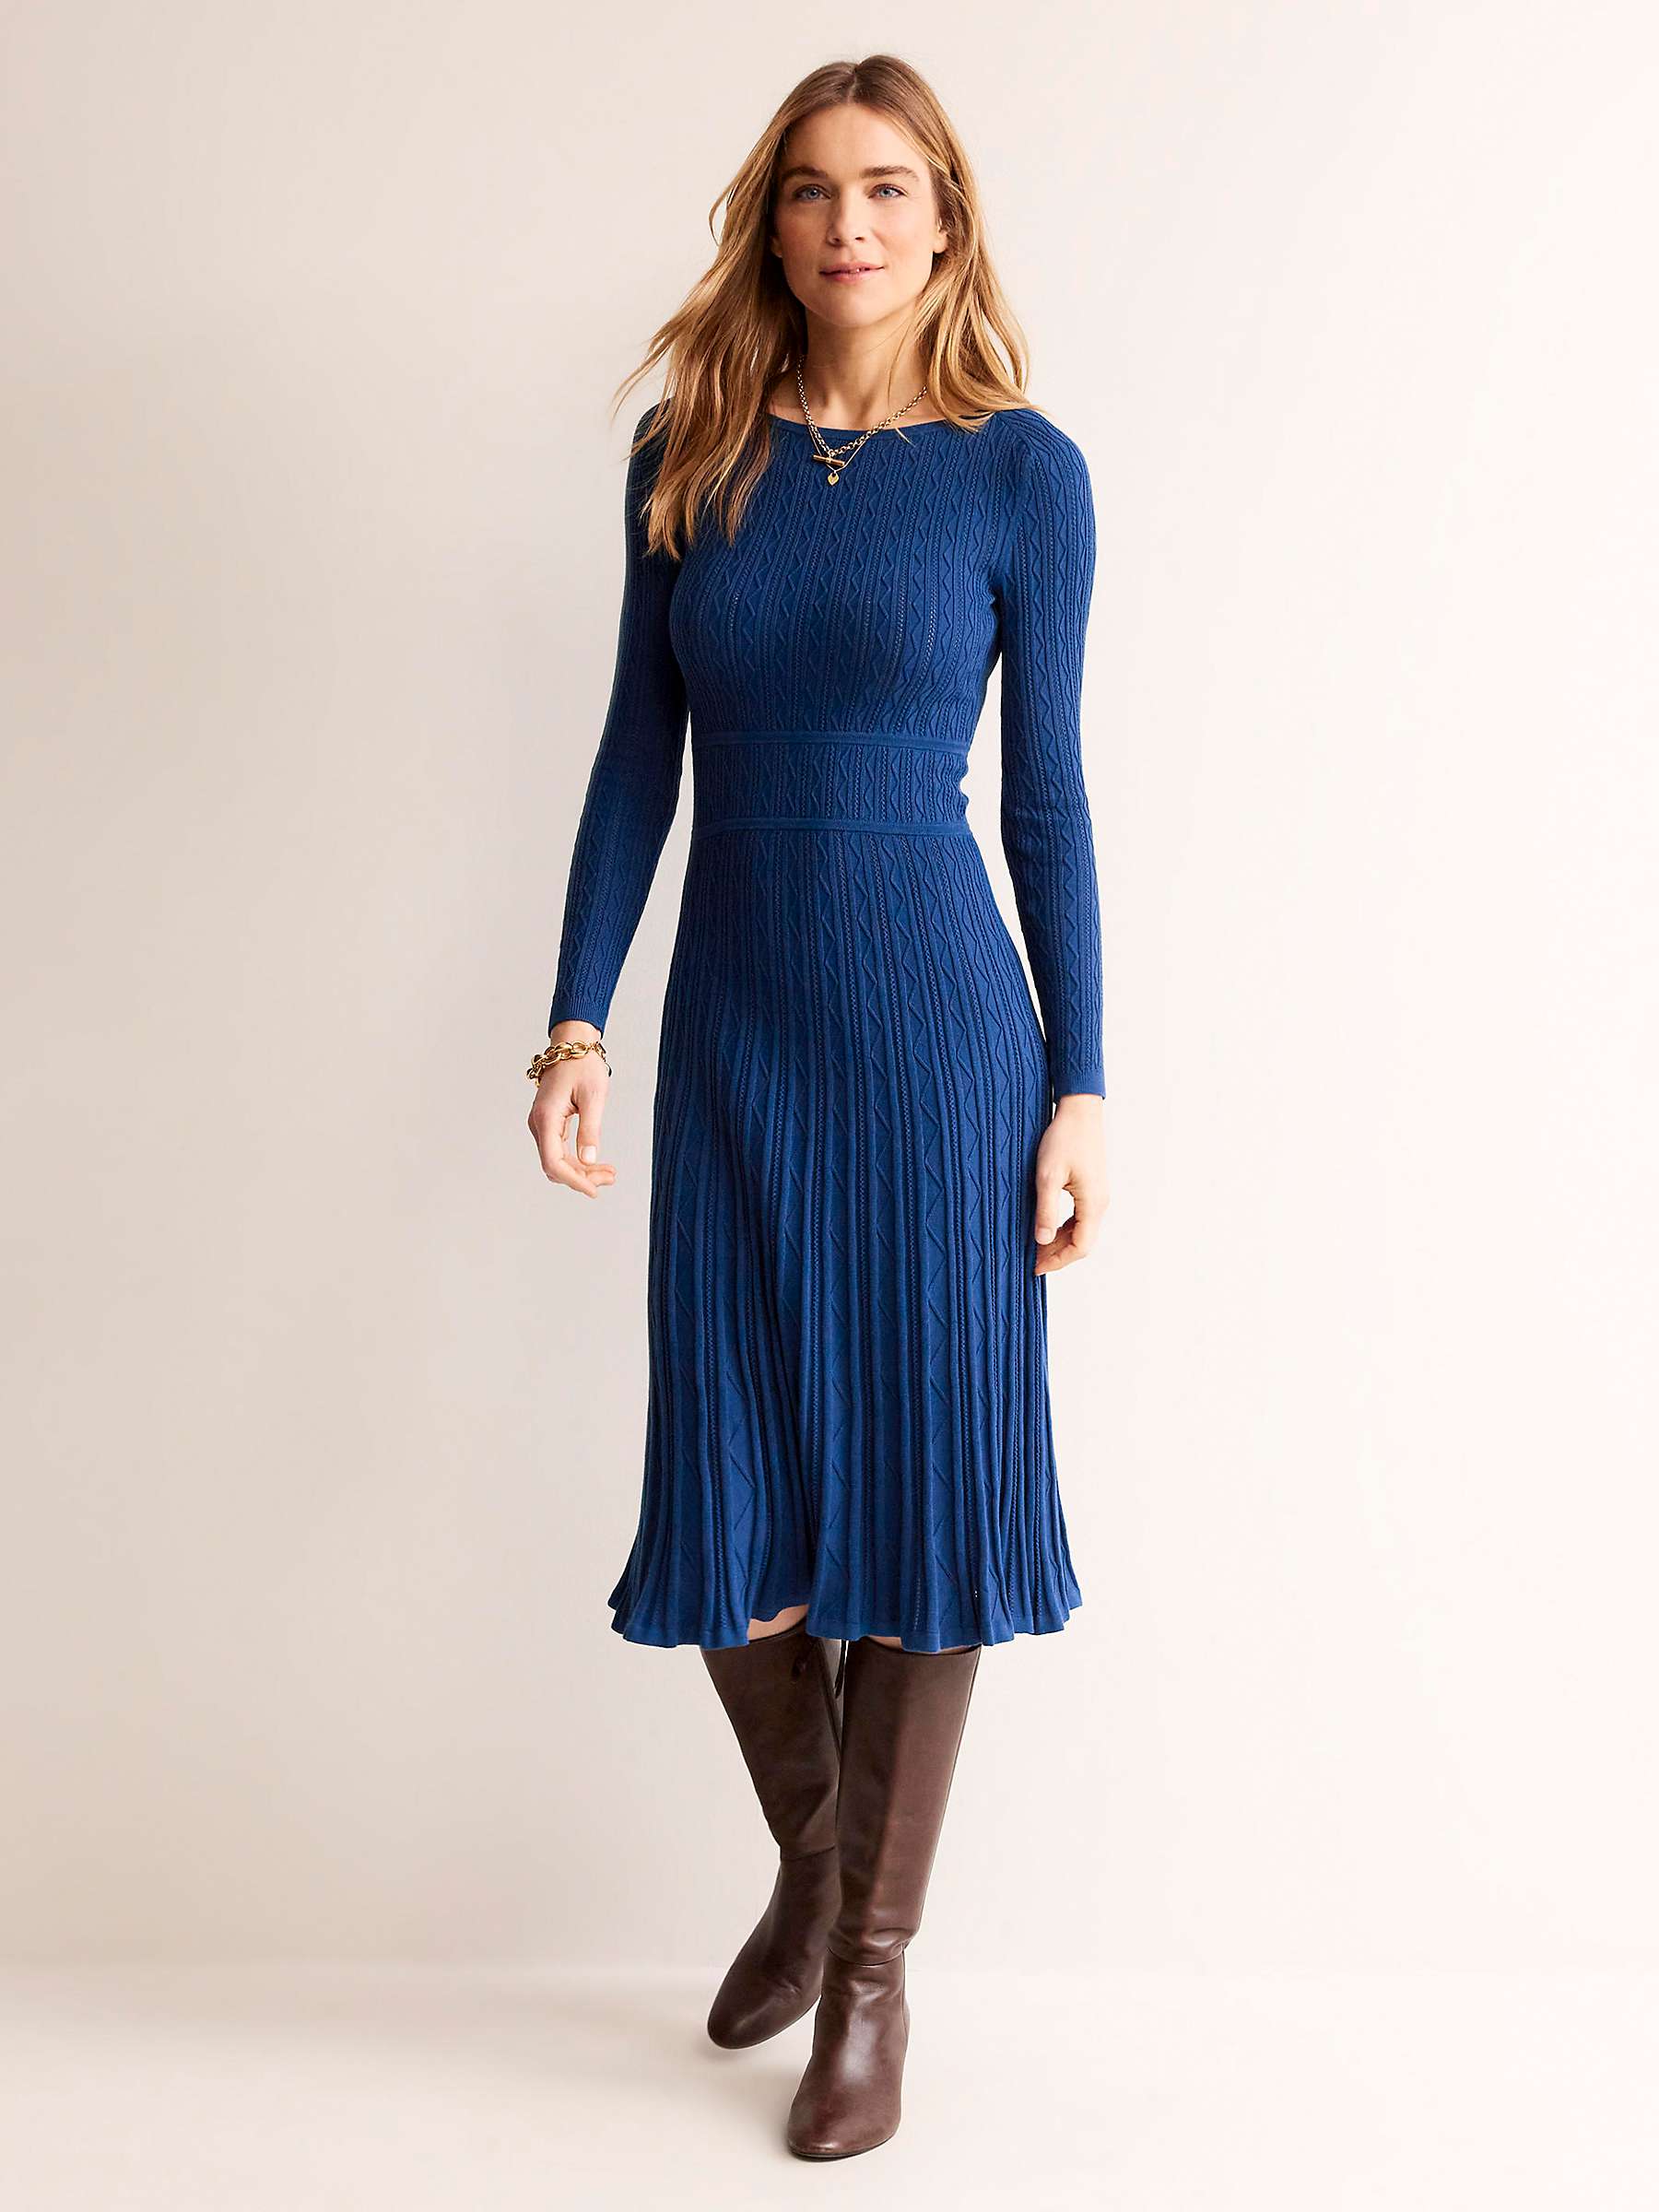 Buy Boden Imogen Cable Knit Dress, Navy Peony Online at johnlewis.com